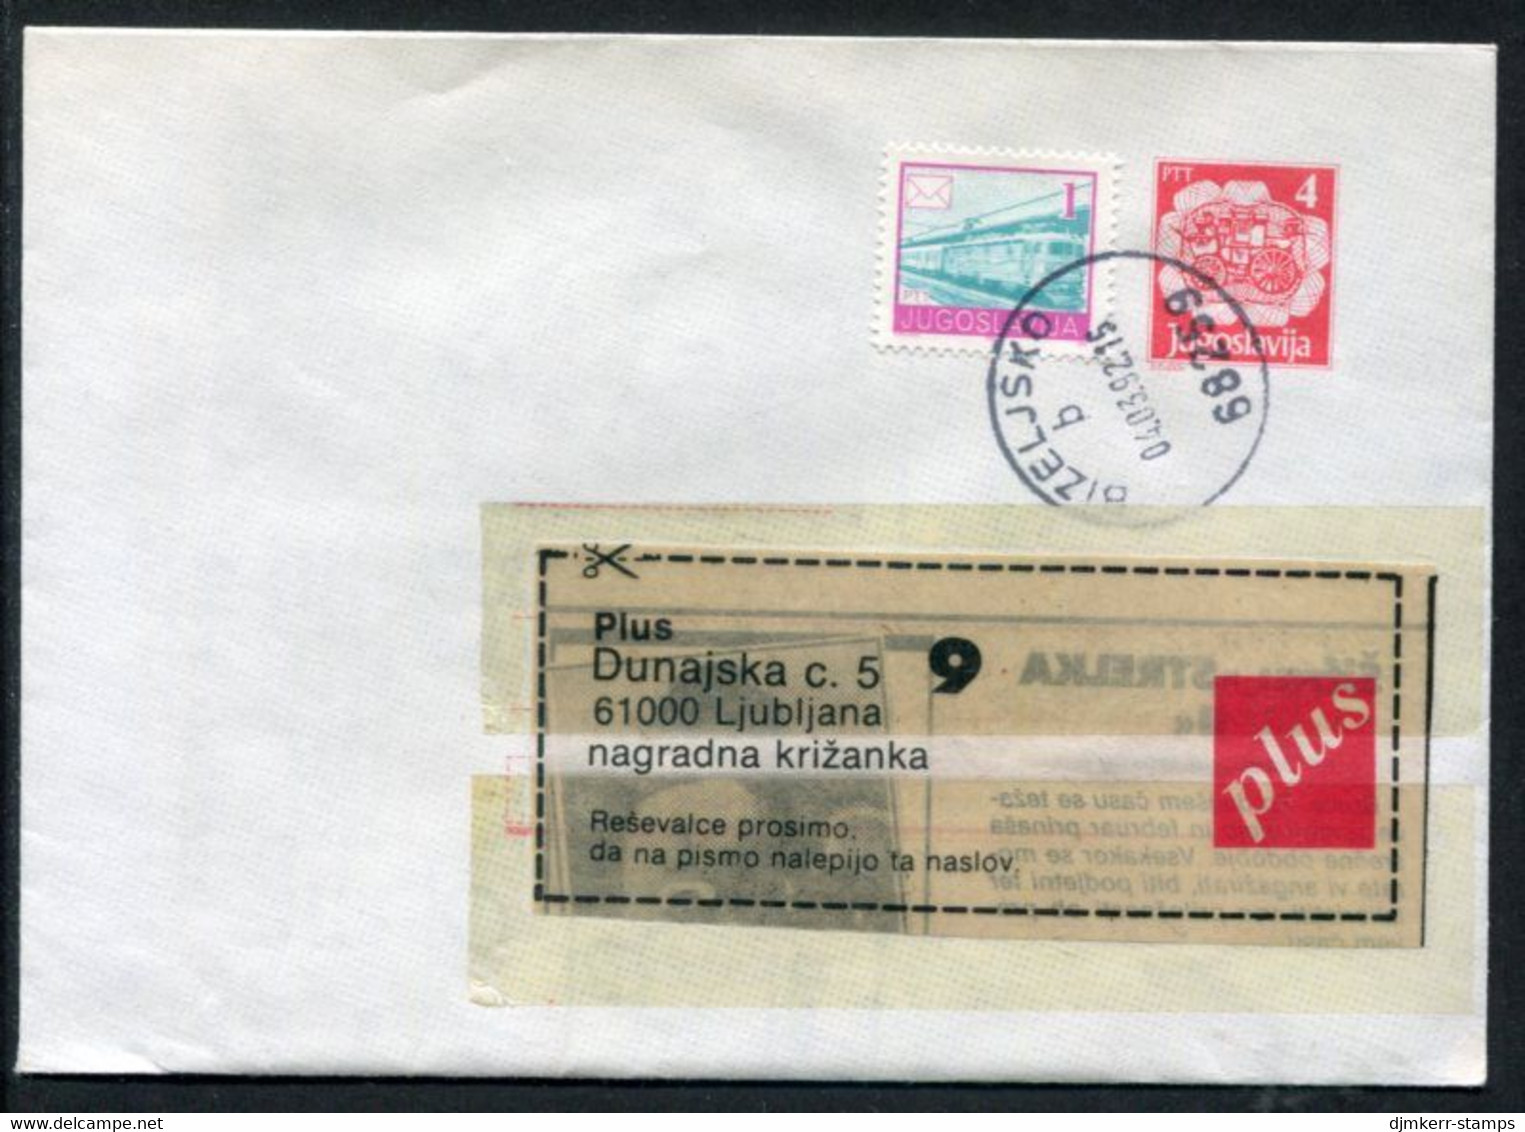 YUGOSLAVIA 1991 Mailcoach 4 D. Stationery Envelope Used With Additional Franking.  Michel U98 - Entiers Postaux